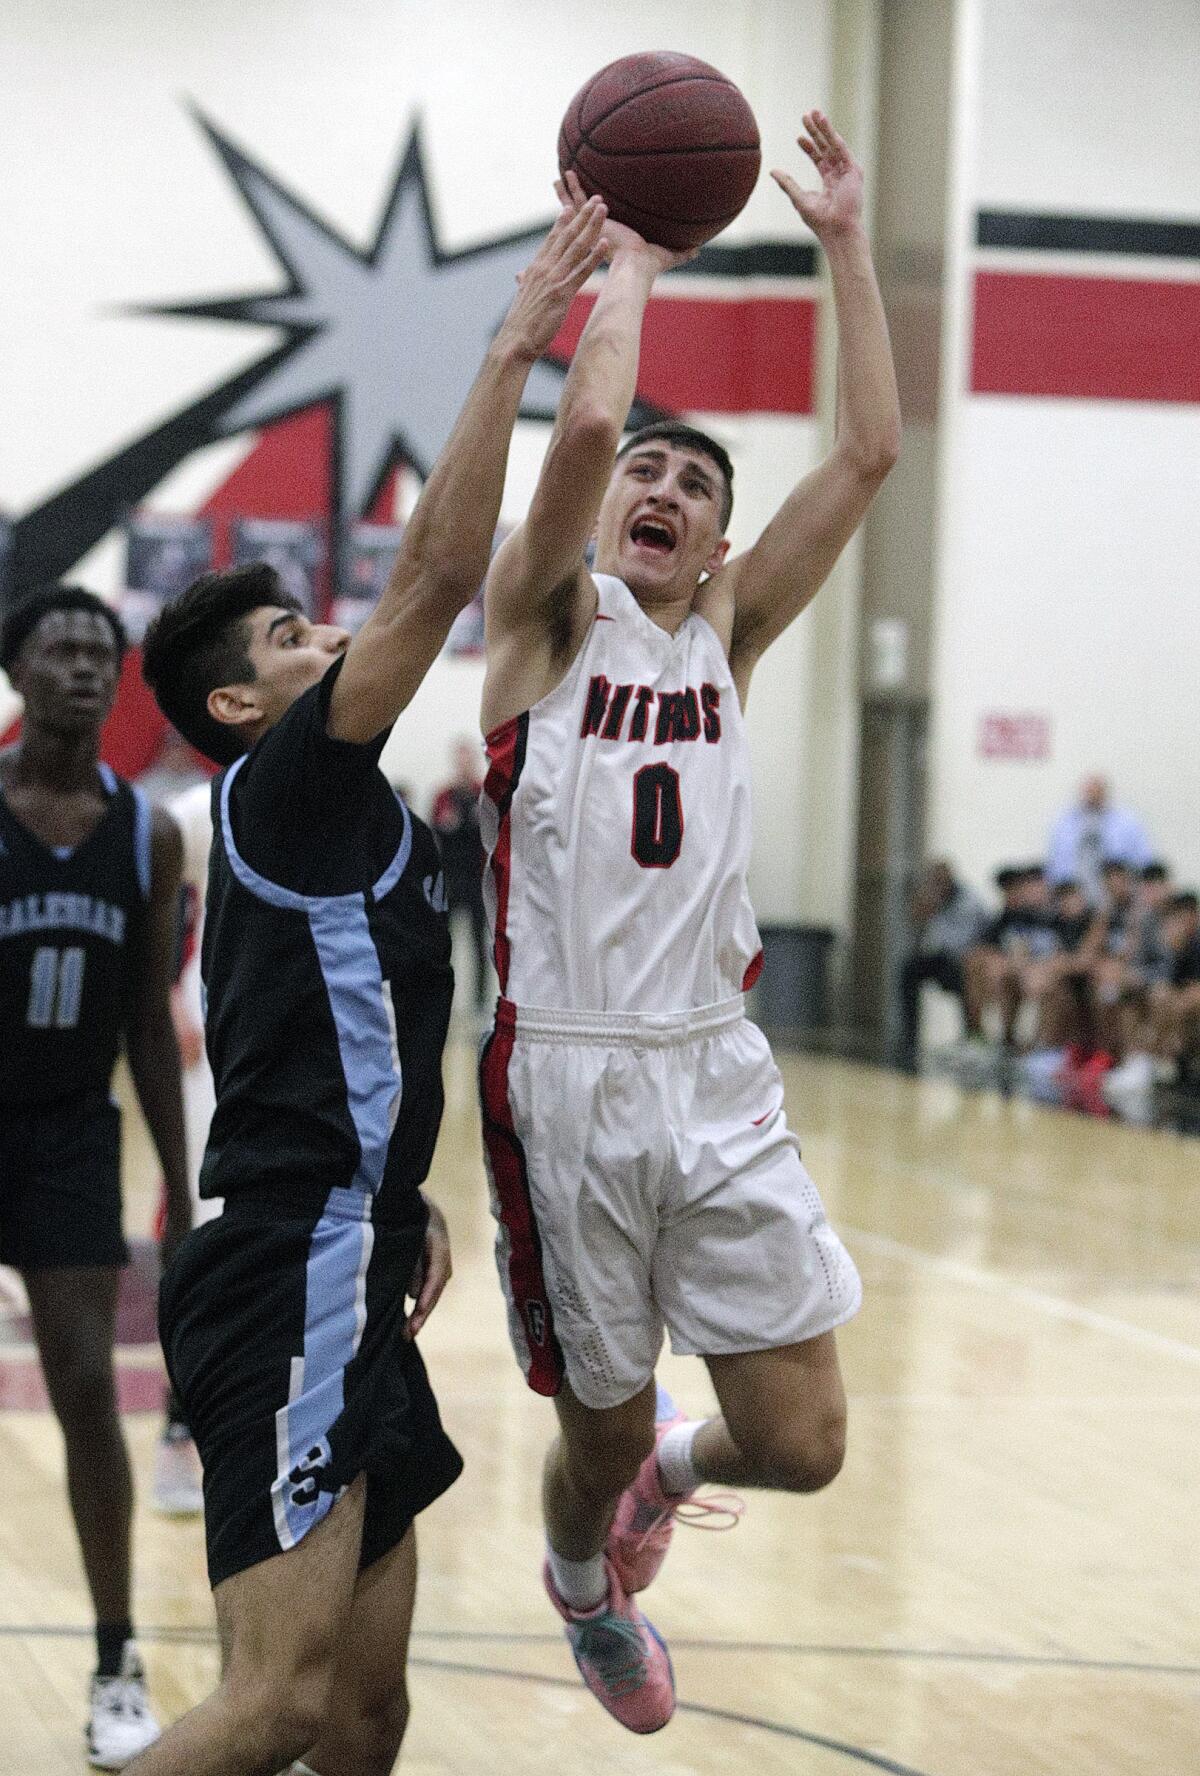 Glendale's Manny Kapoushian drives and shoots, is fouled, and scores against Salesian's Efren Lemus in the CIF Southern Section division III-AAA second-round boys' basketball playoff in at Glendale High School on Friday, February 14, 2020. Salesian won the game in overtime beating Glendale 55-49.